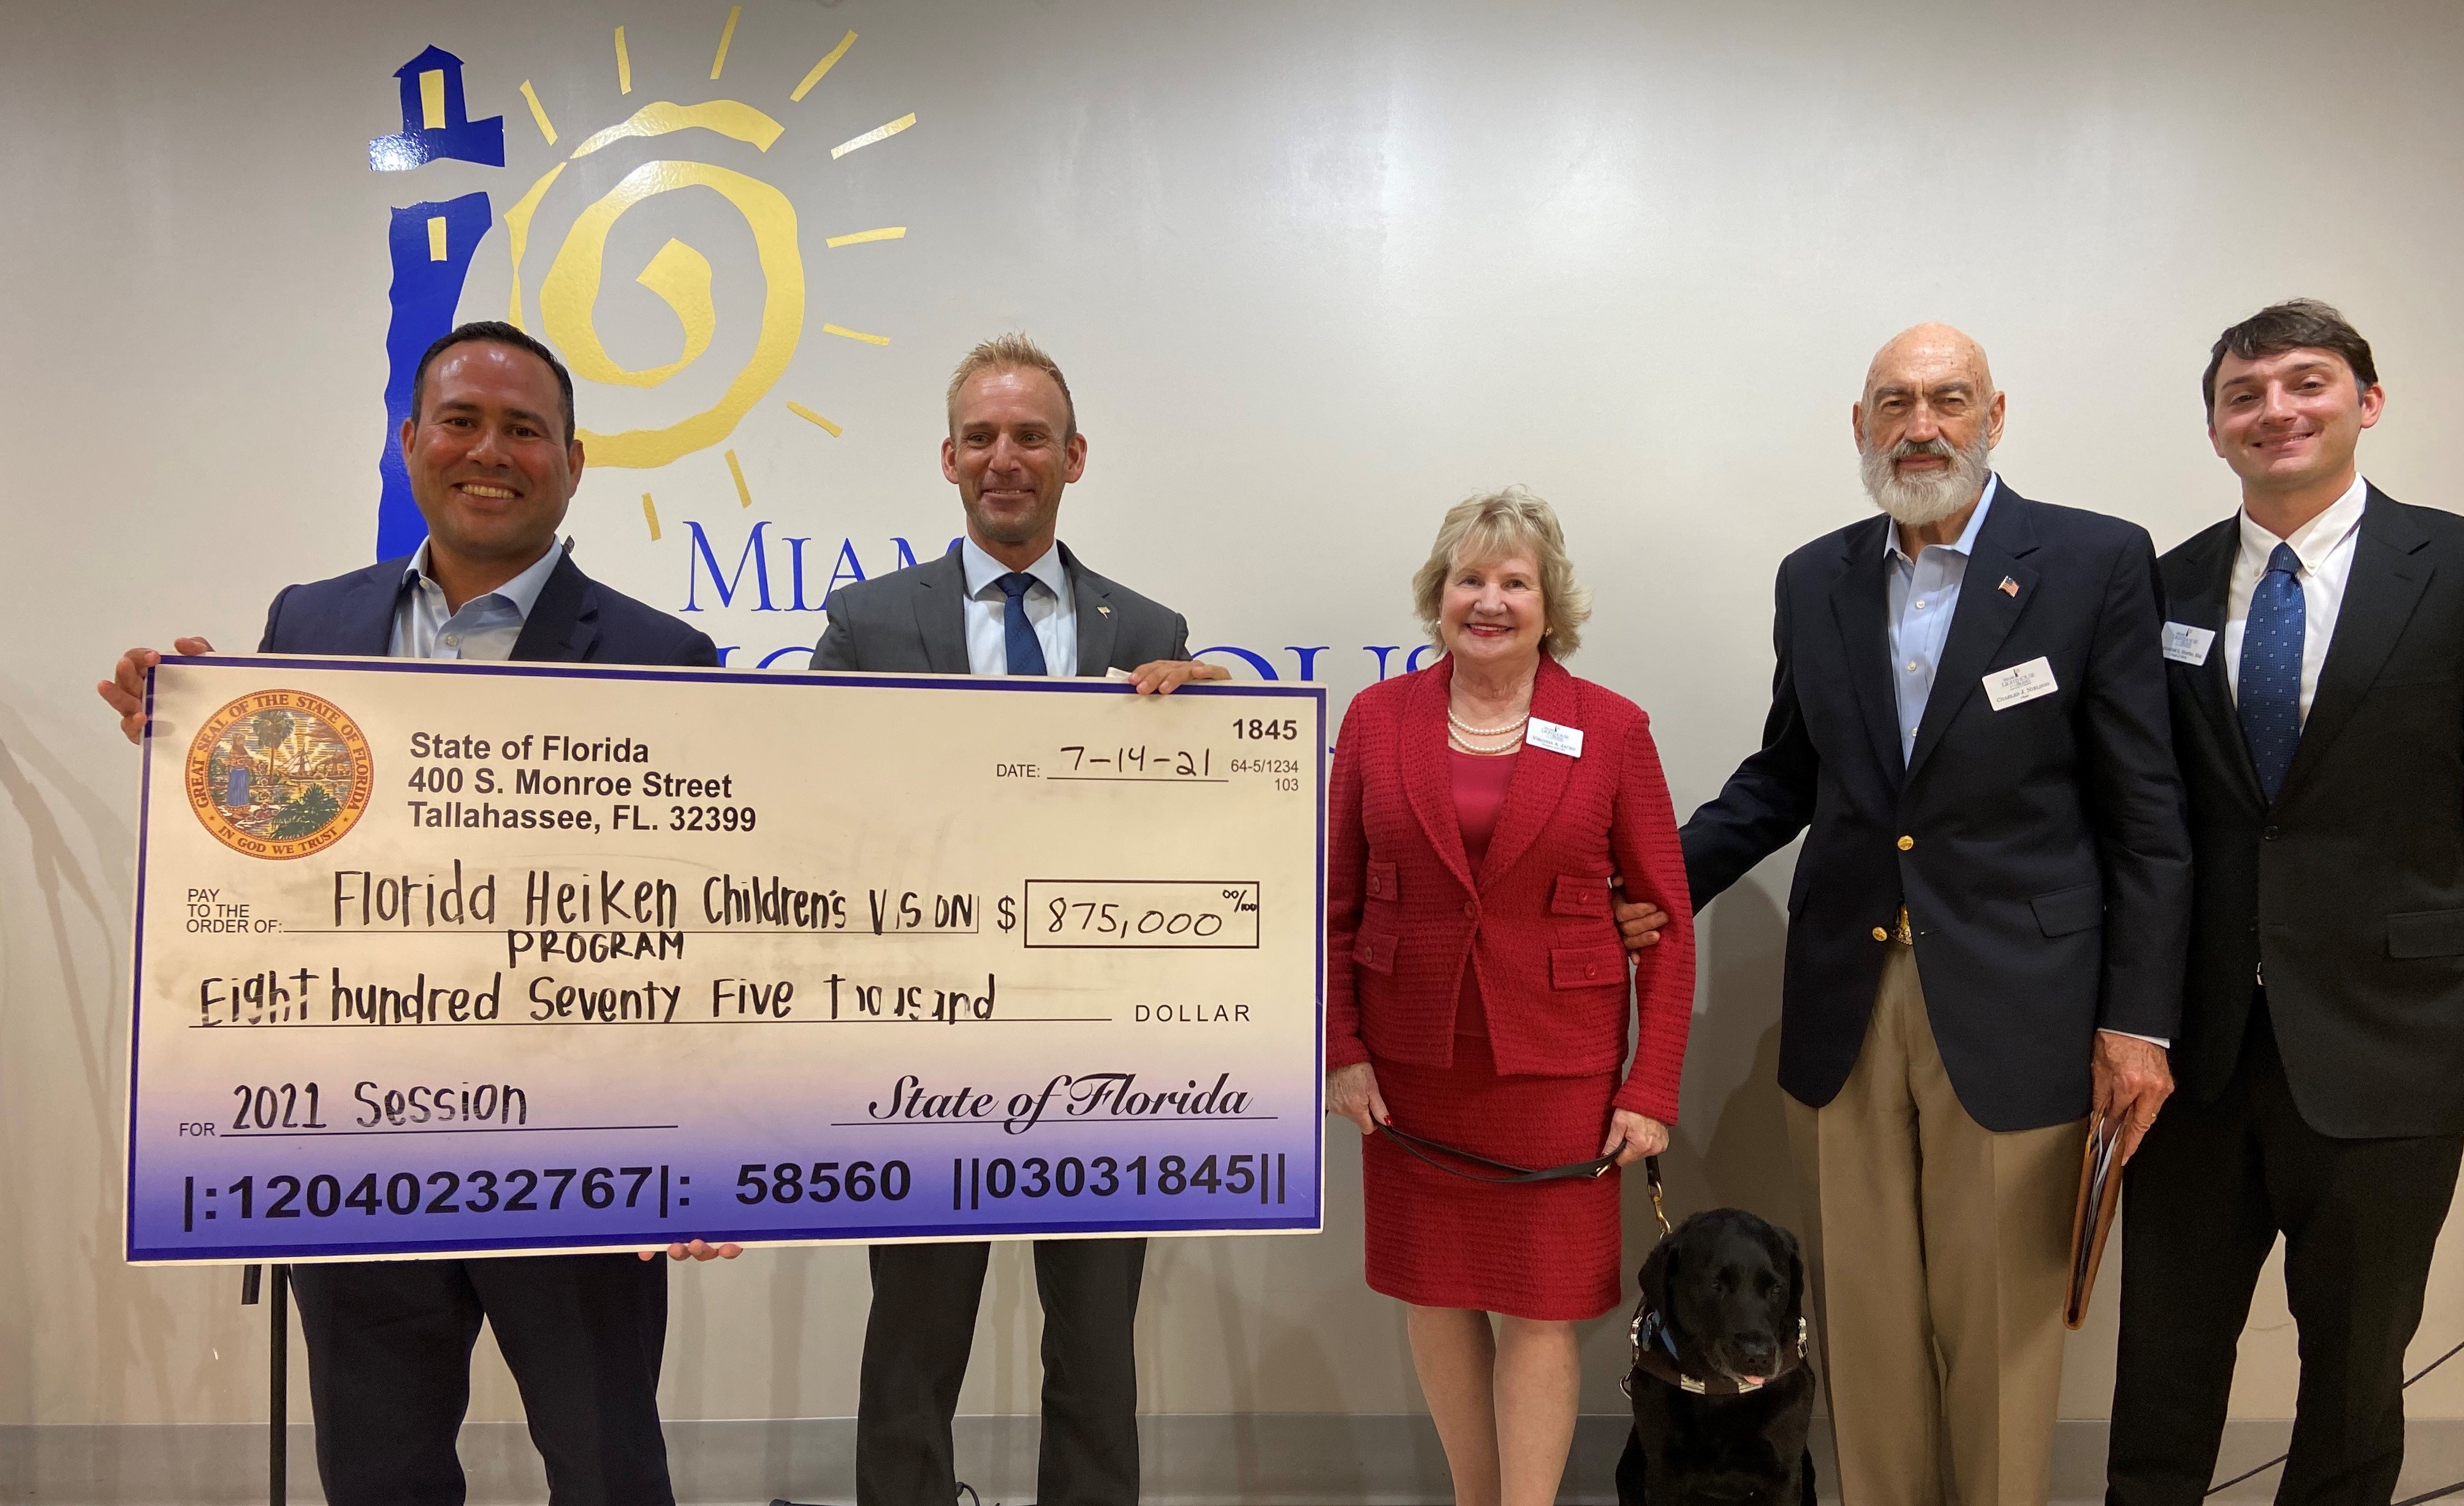 Representative Nicholas Duran and Representative Michael Grieco present check to President and CEO Virginia Jacko, Board Chair Charles Nielson Sr. and YPOL Chair Alexander Nostro.